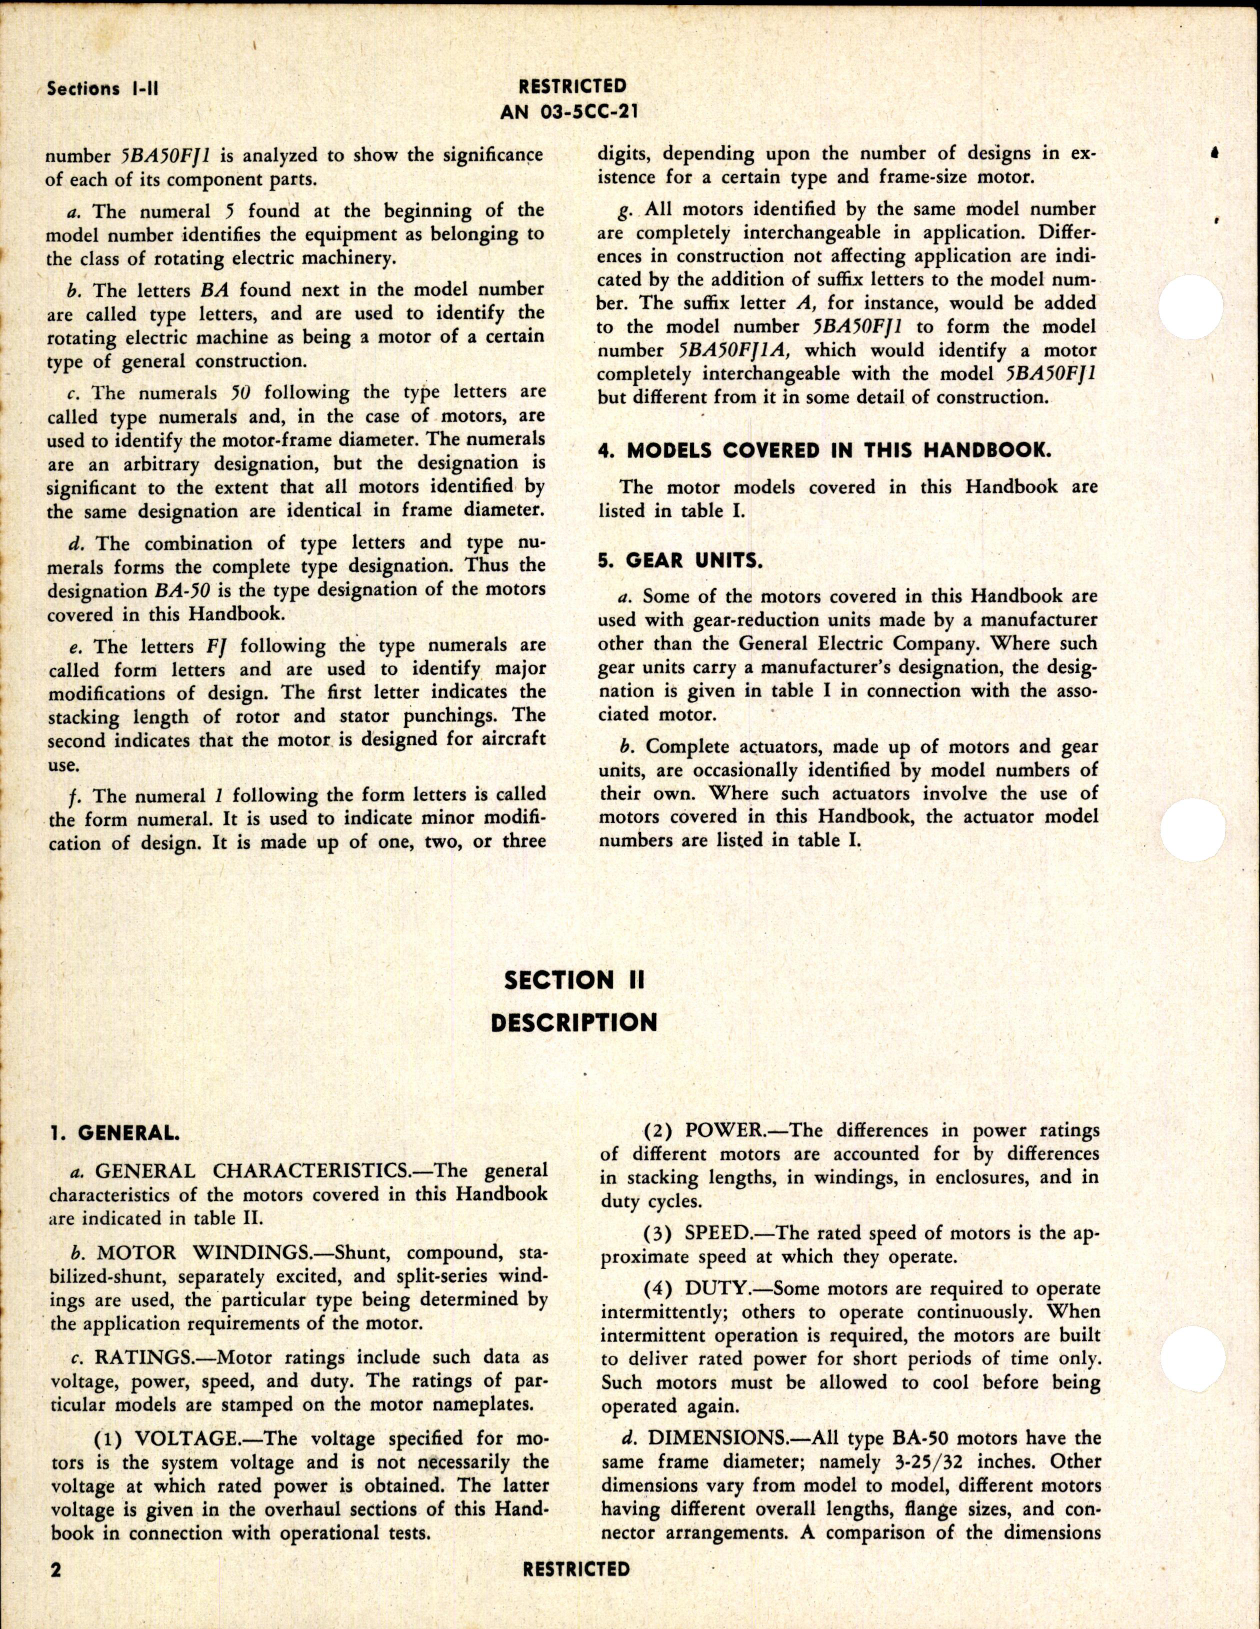 Sample page 4 from AirCorps Library document: Handbook of Instructions w/ Parts Catalog for Model 5BA50 Electric Motors